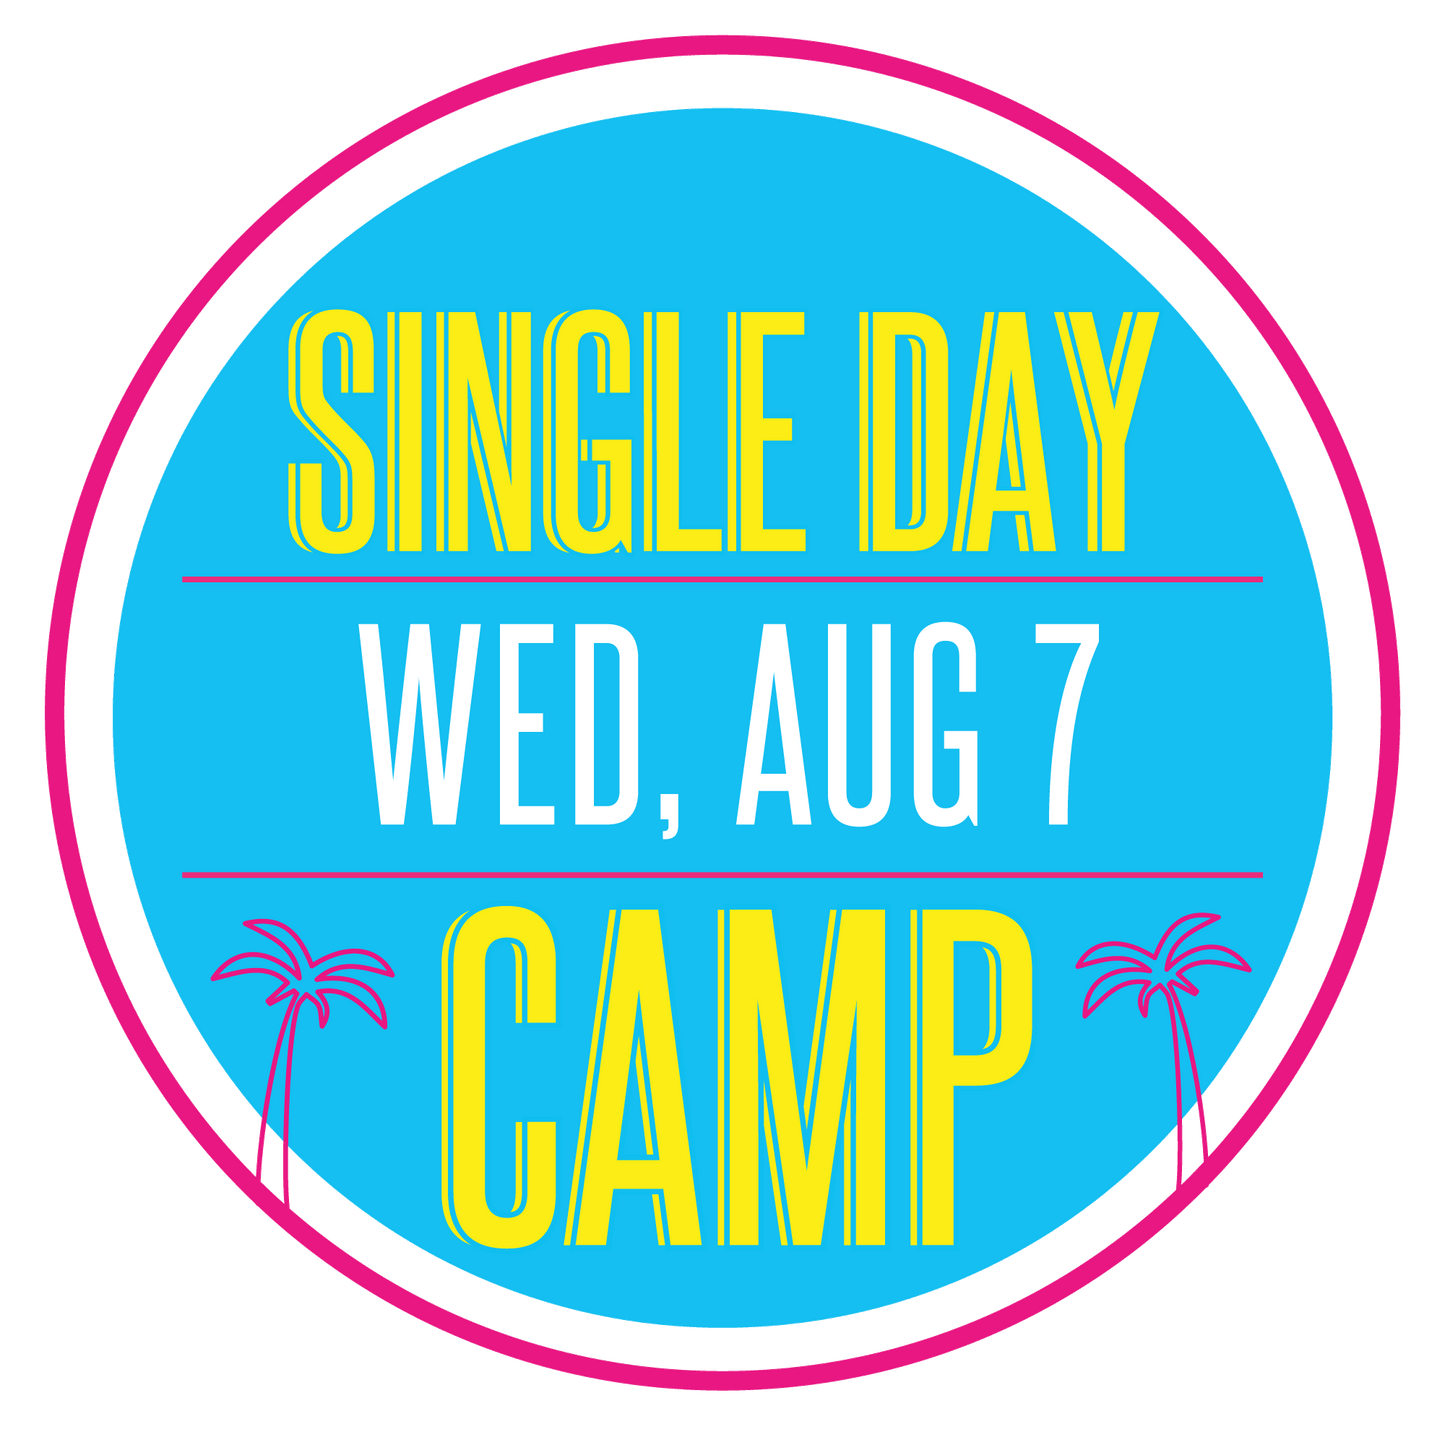 Single Day Sewing Workshop: Wednesday, August 7, 9am-3pm